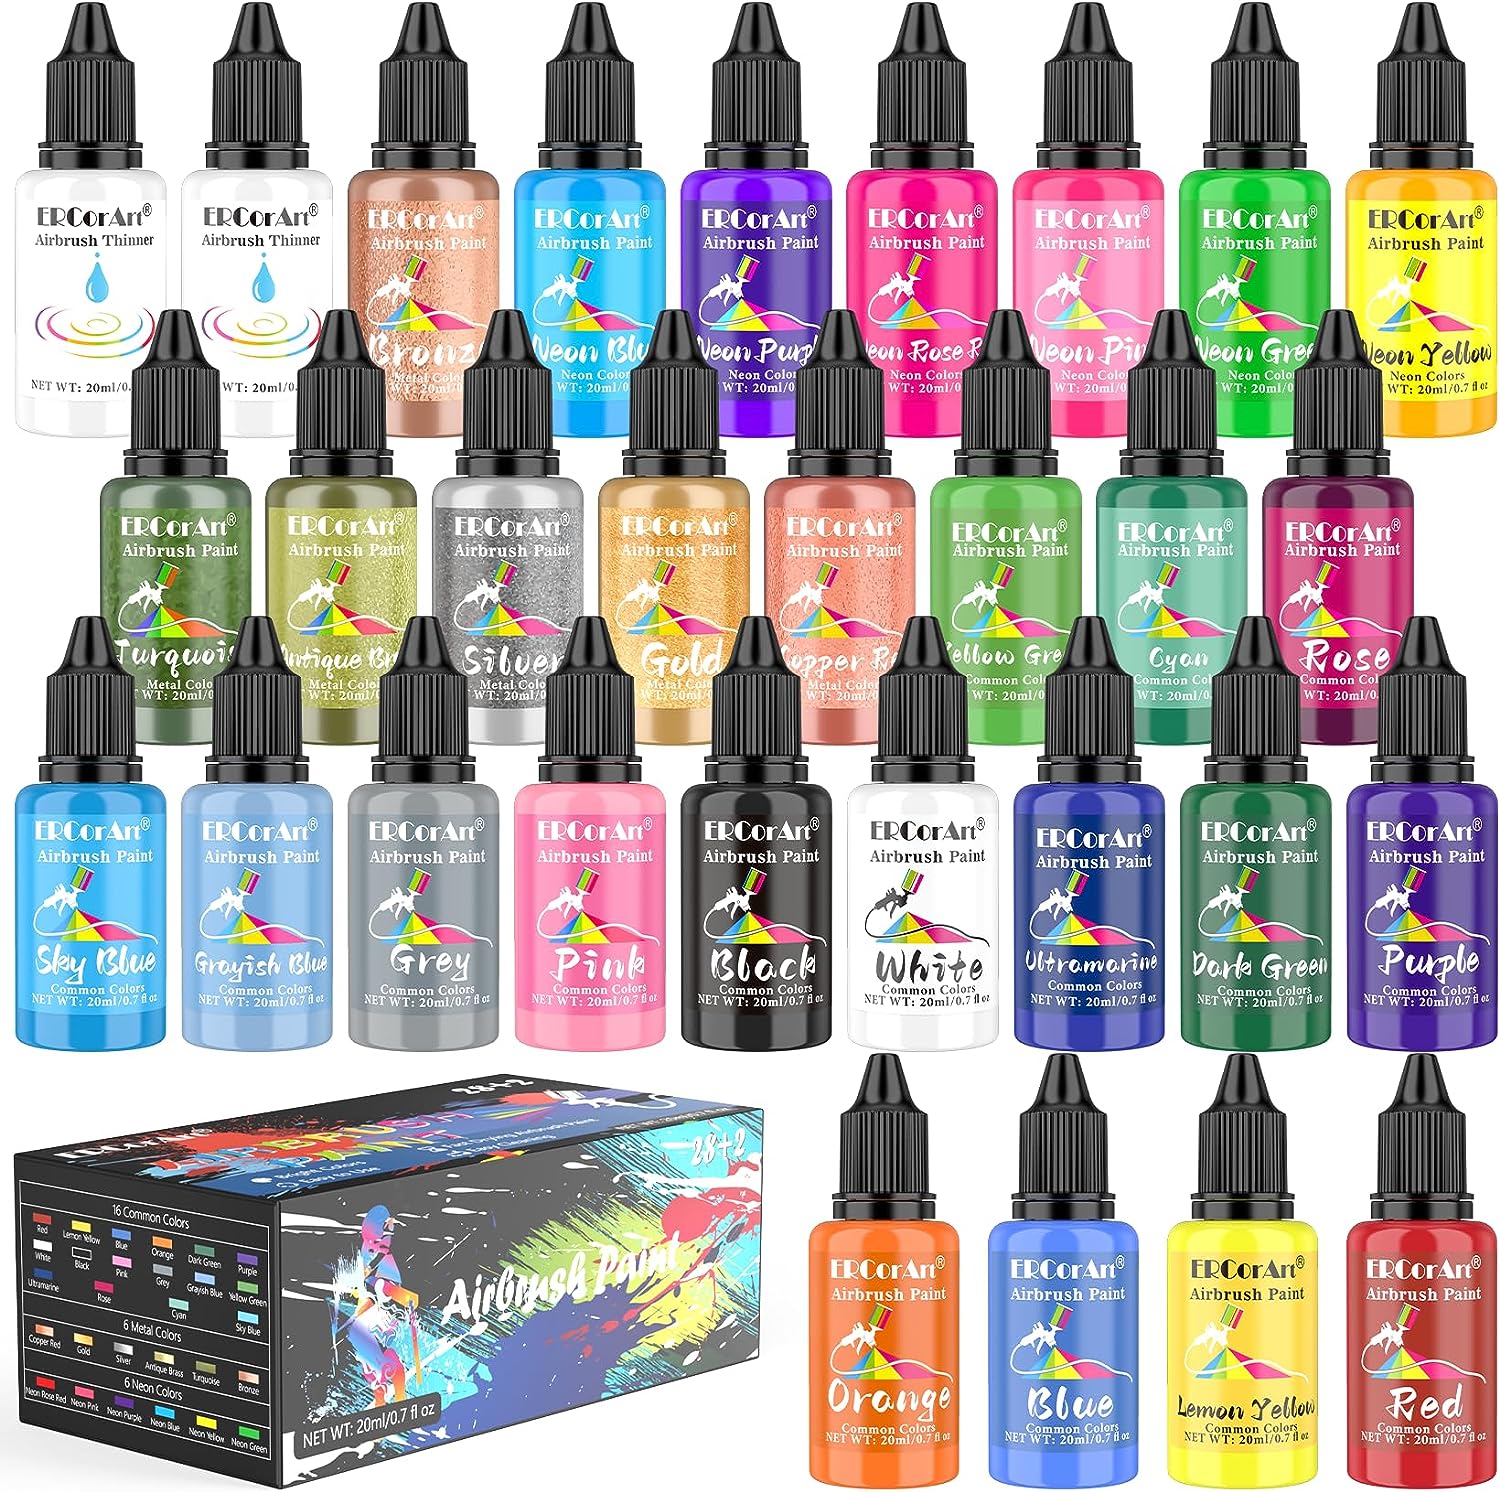 Airbrush Paint Set - 28 Colors Airbrush Paint with 2 [...]